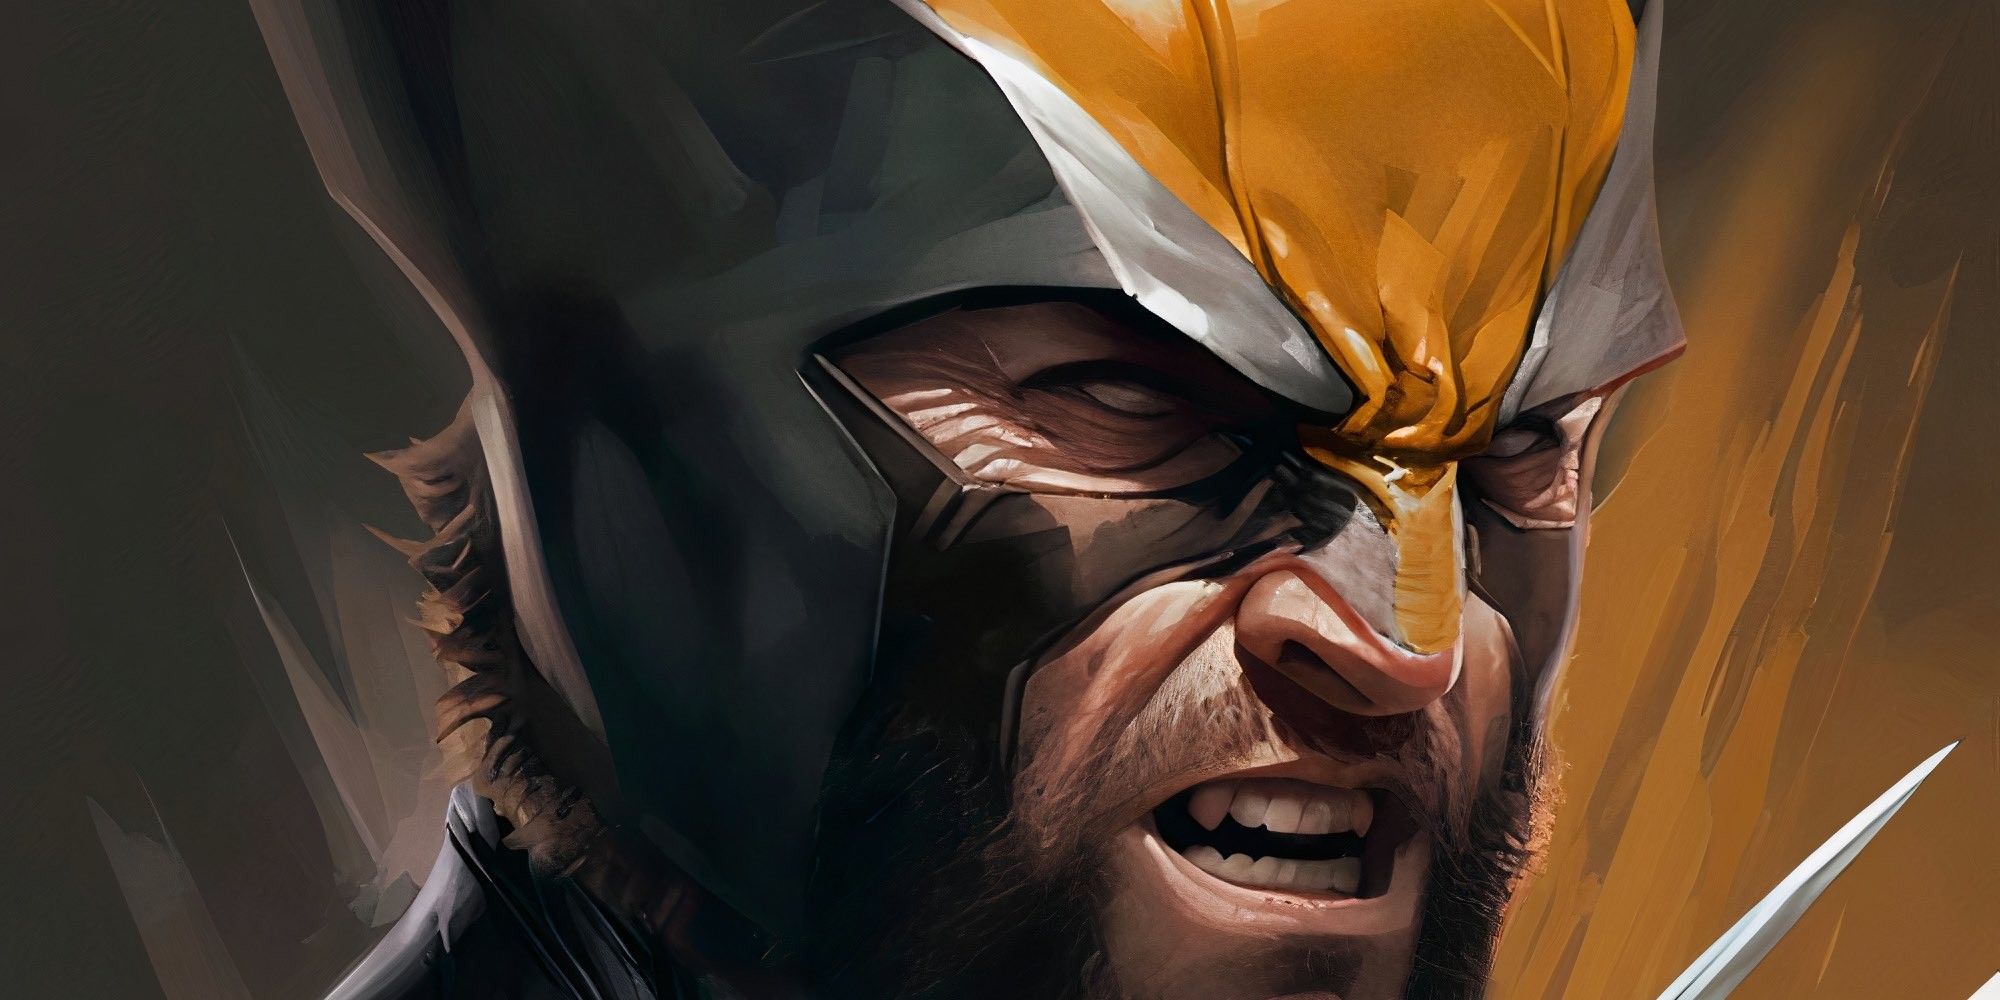 Fan art of Hugh Jackman with yellow Wolverine suit